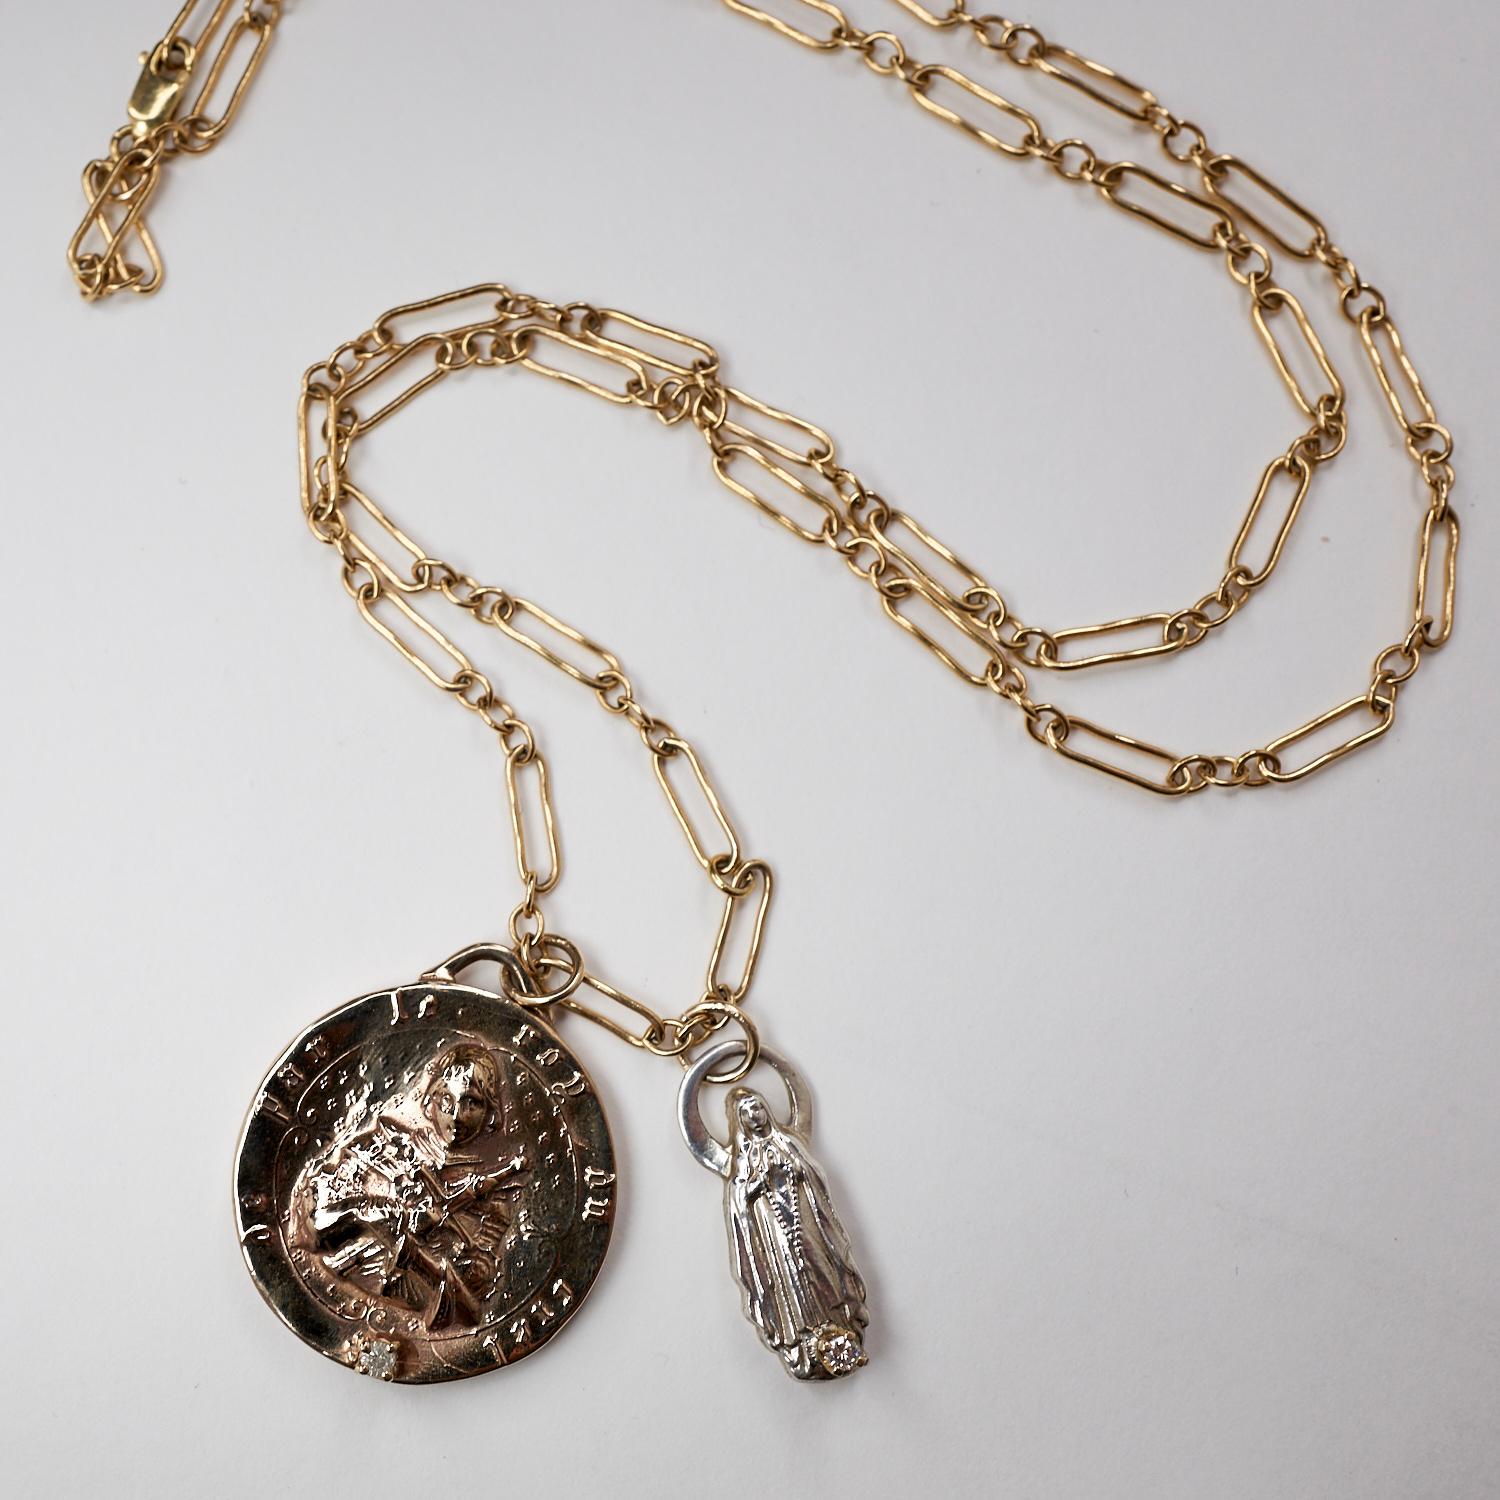 Brilliant Cut White Diamond Chain Necklace Medal Pendant Joan of Arc Virgin Mary J Dauphin For Sale